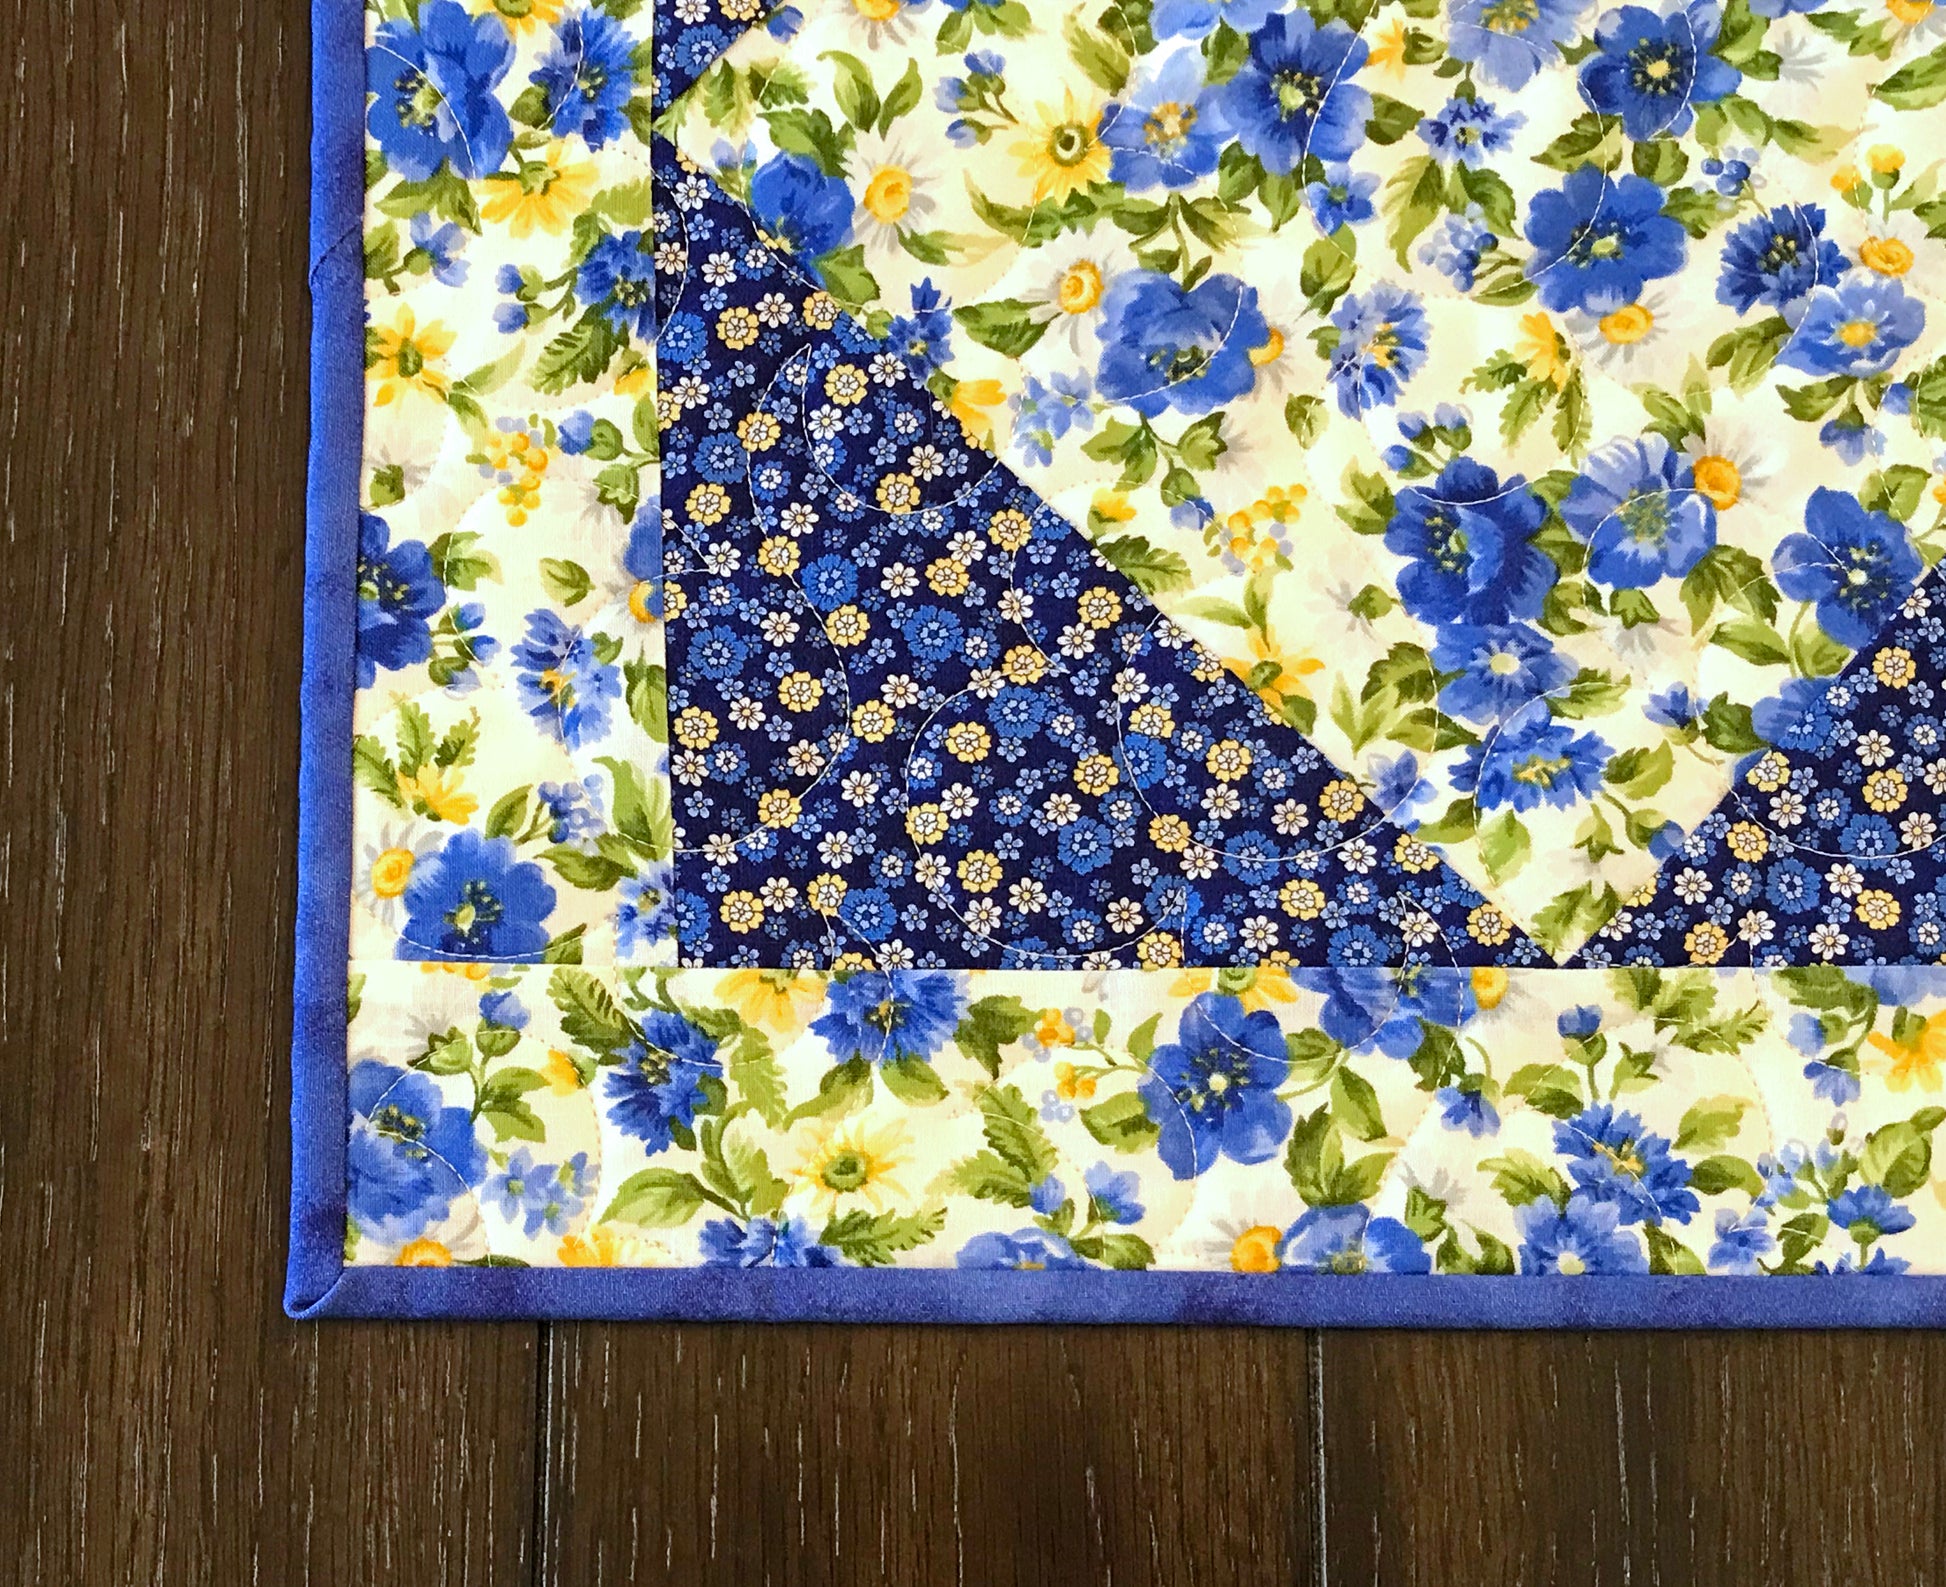 lose up of corner on Blue and yellow floral table runner with a center diamond pattern displayed on a table